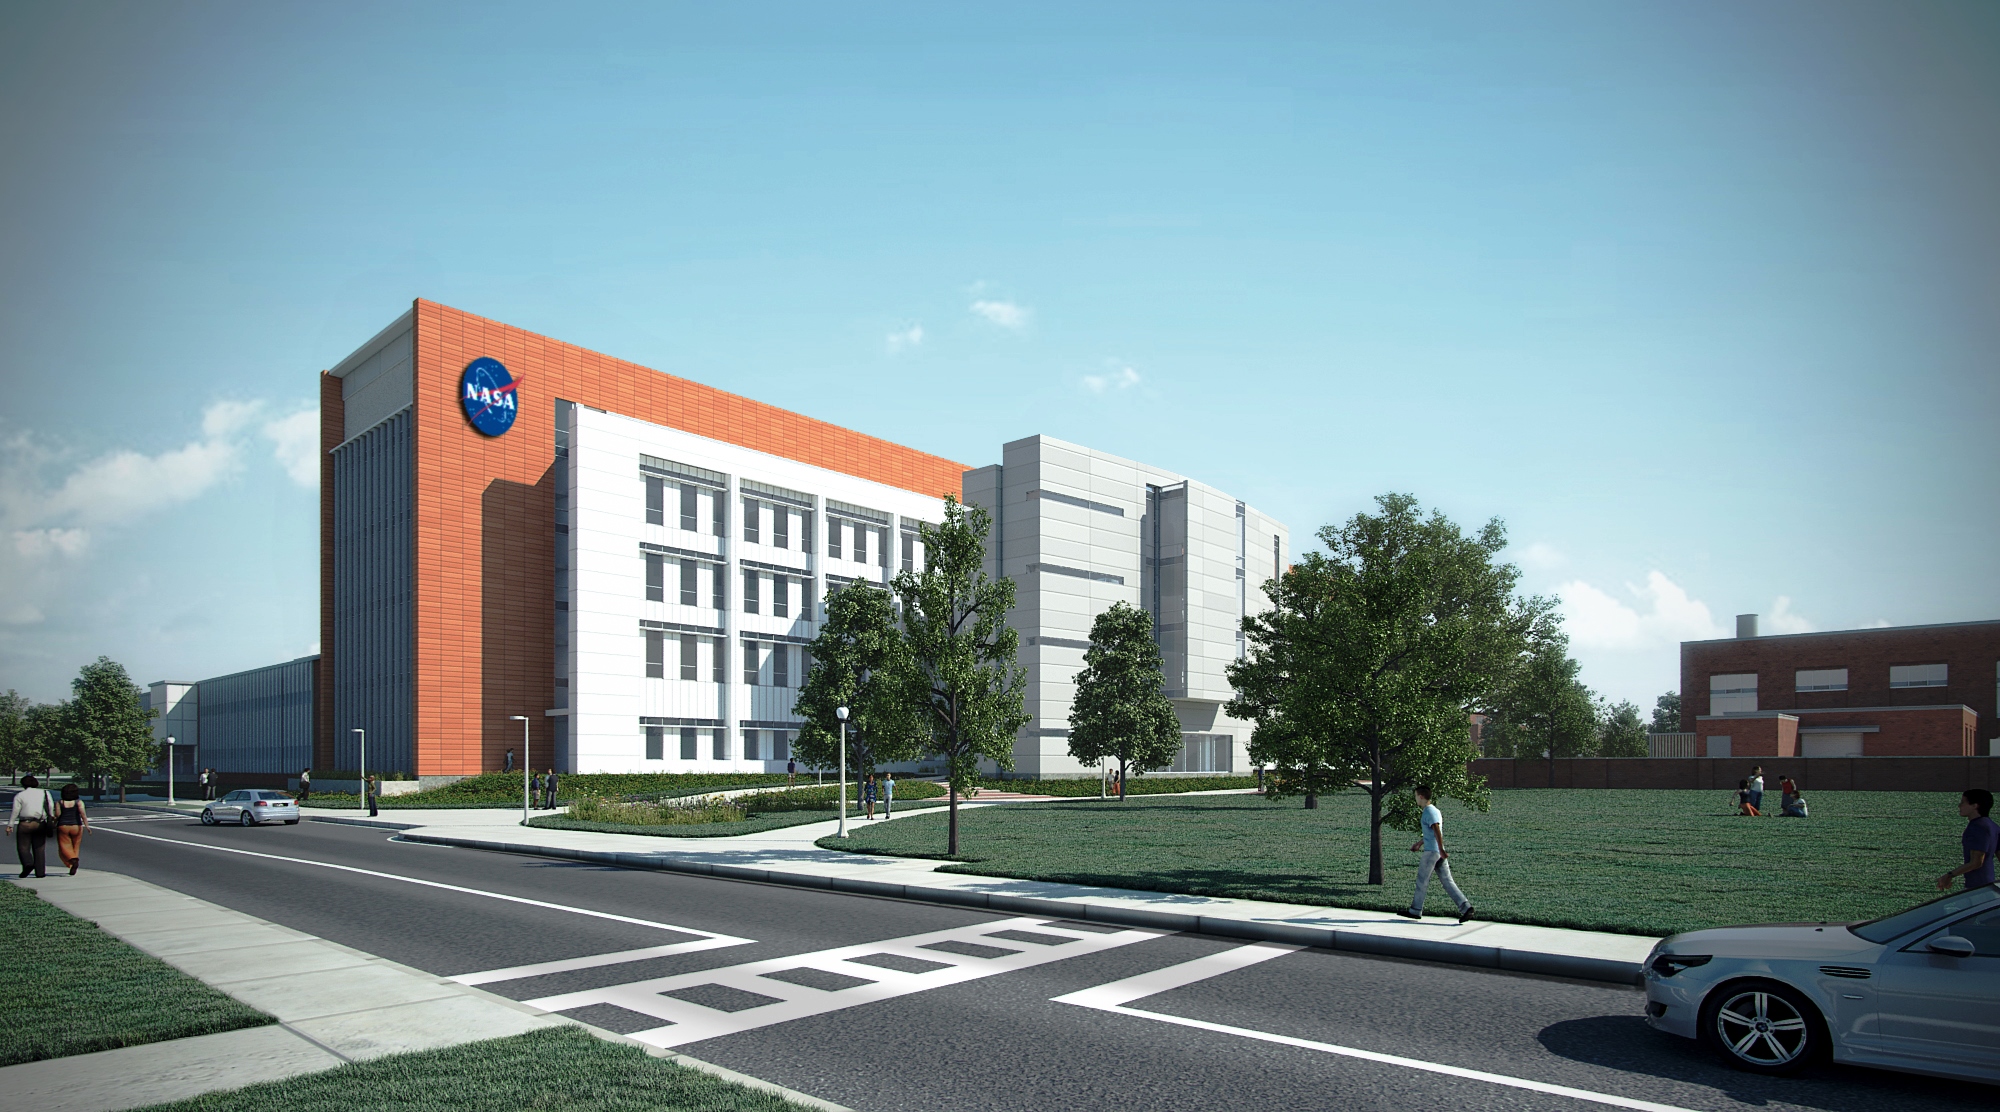 Artist's concept of the Measurement Systems Laboratory building at NASA's Langley Research Center in Hampton, Virginia.